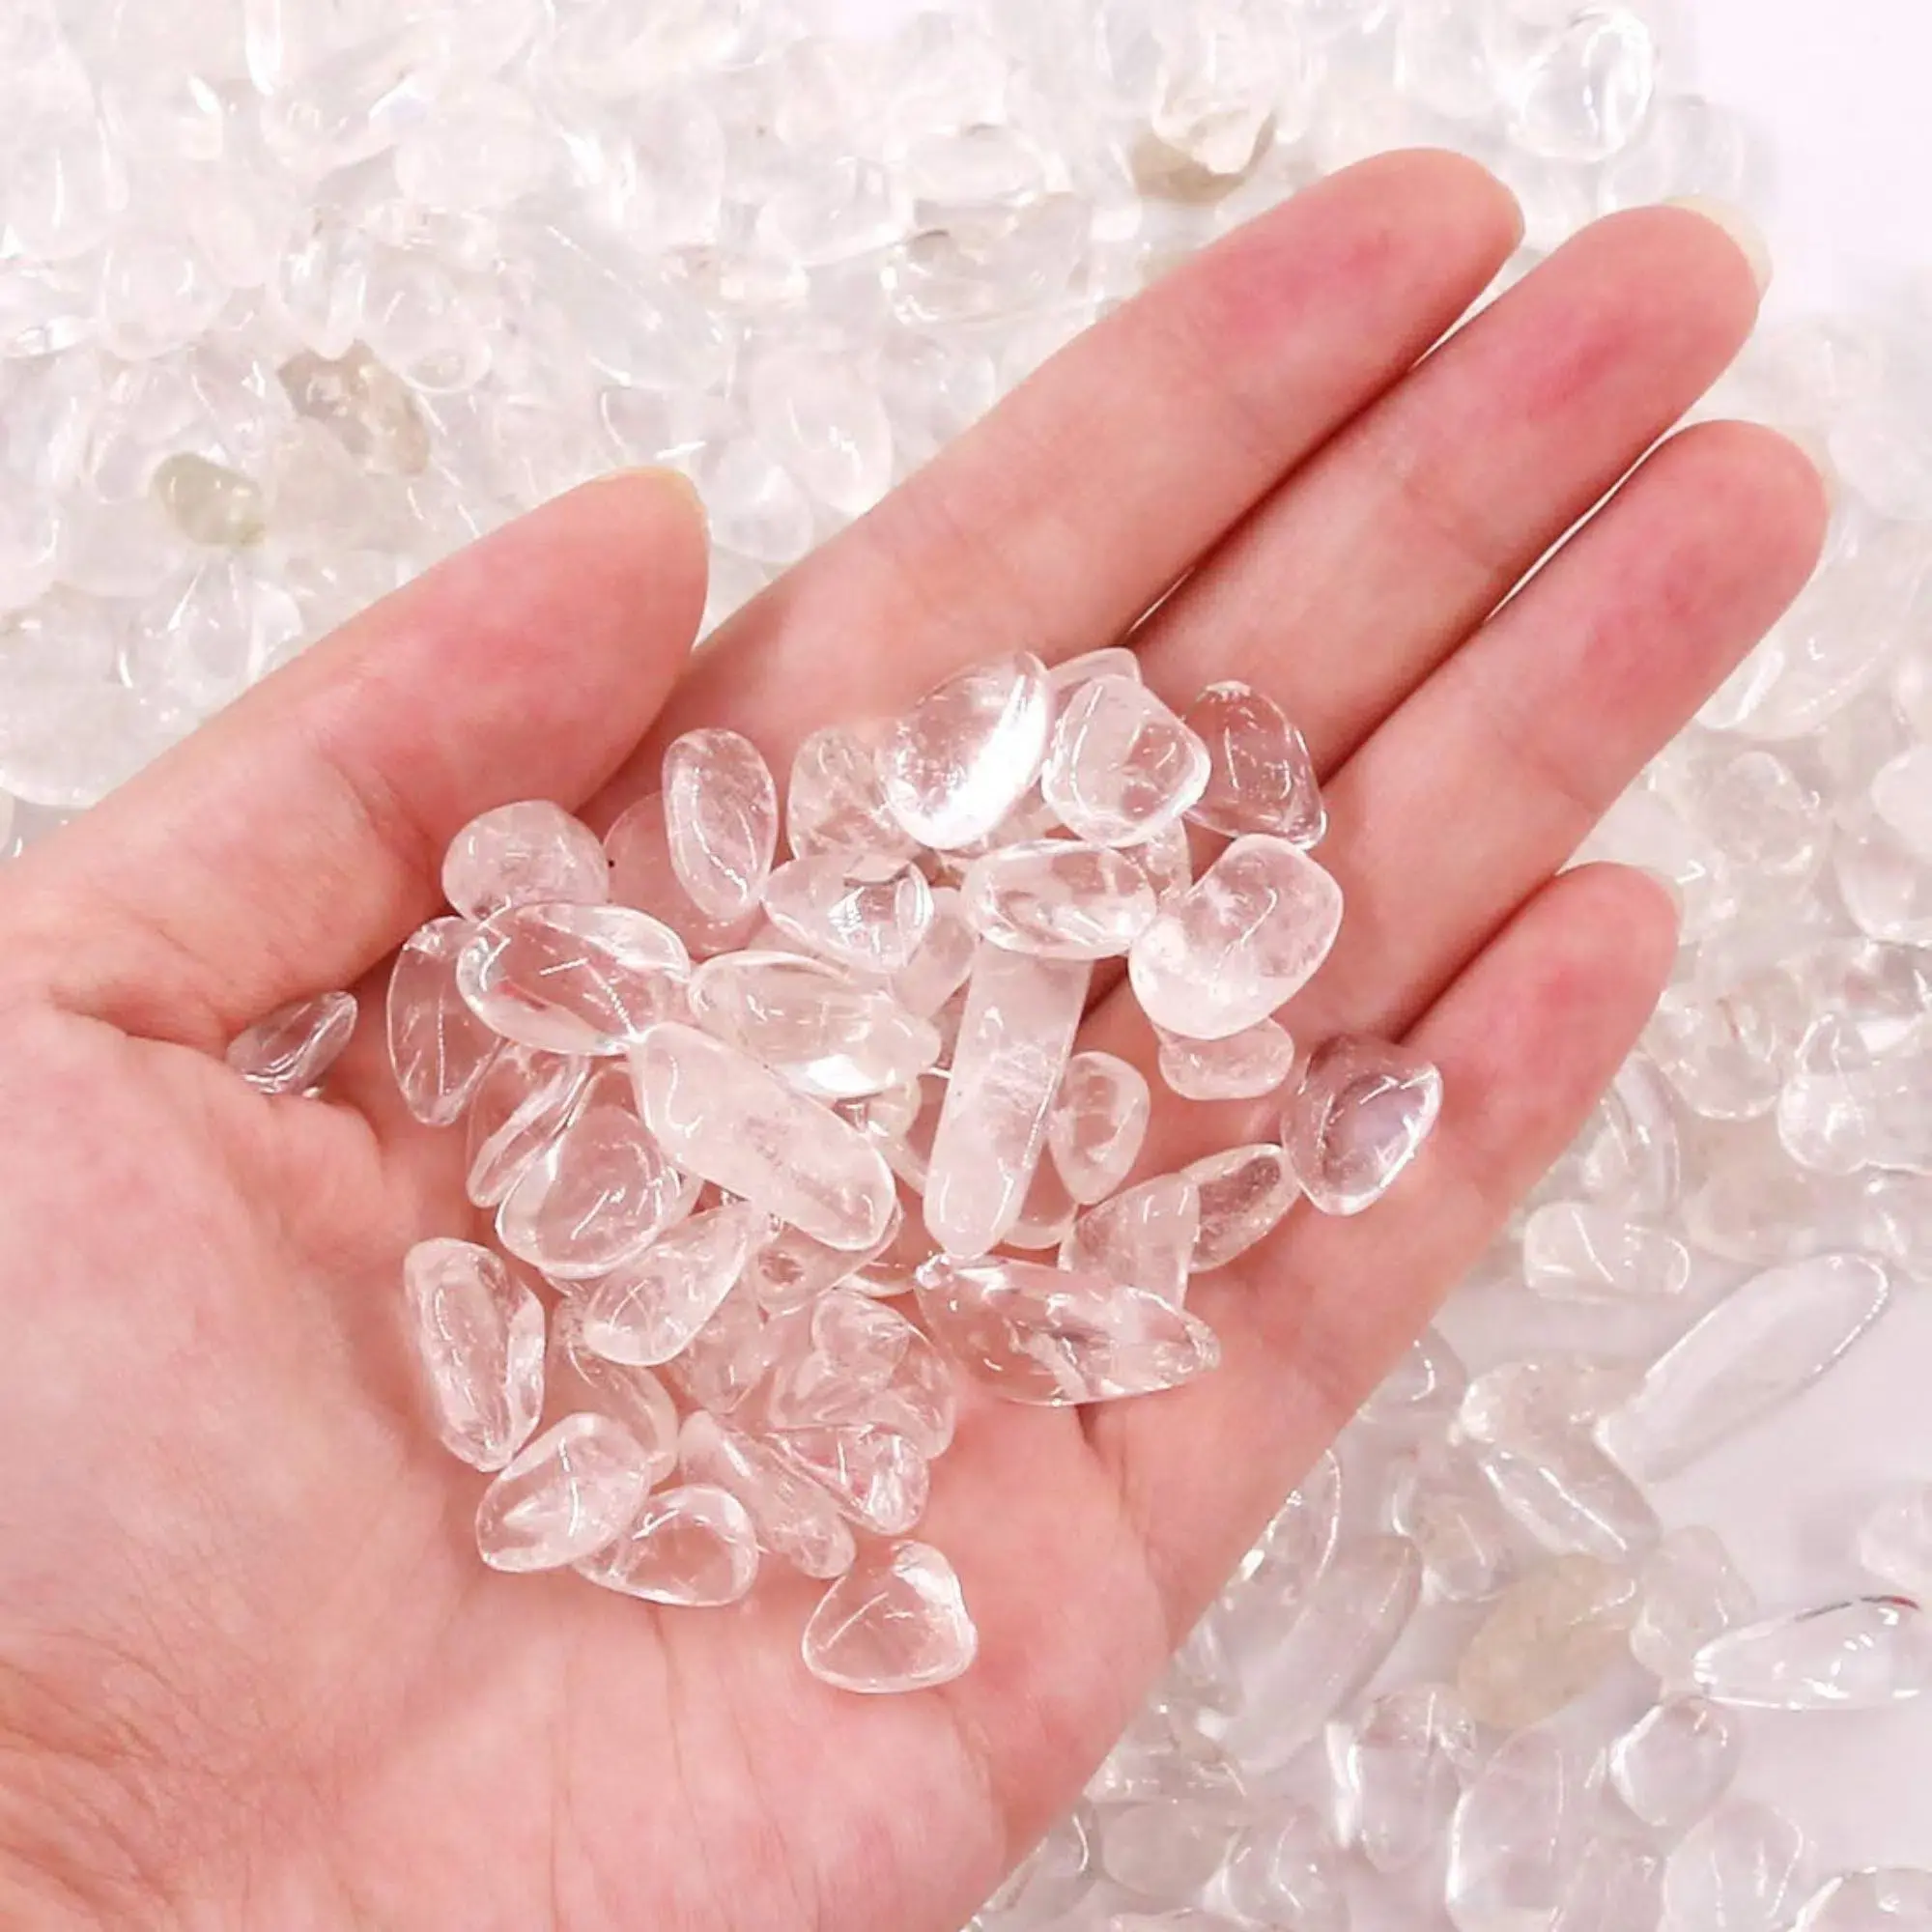 Best Quality Hot Sale Natural Clear Quartz Polished Crystal Chips Top Quality Raw Crystal Stone Agate Bulk Order For Sale